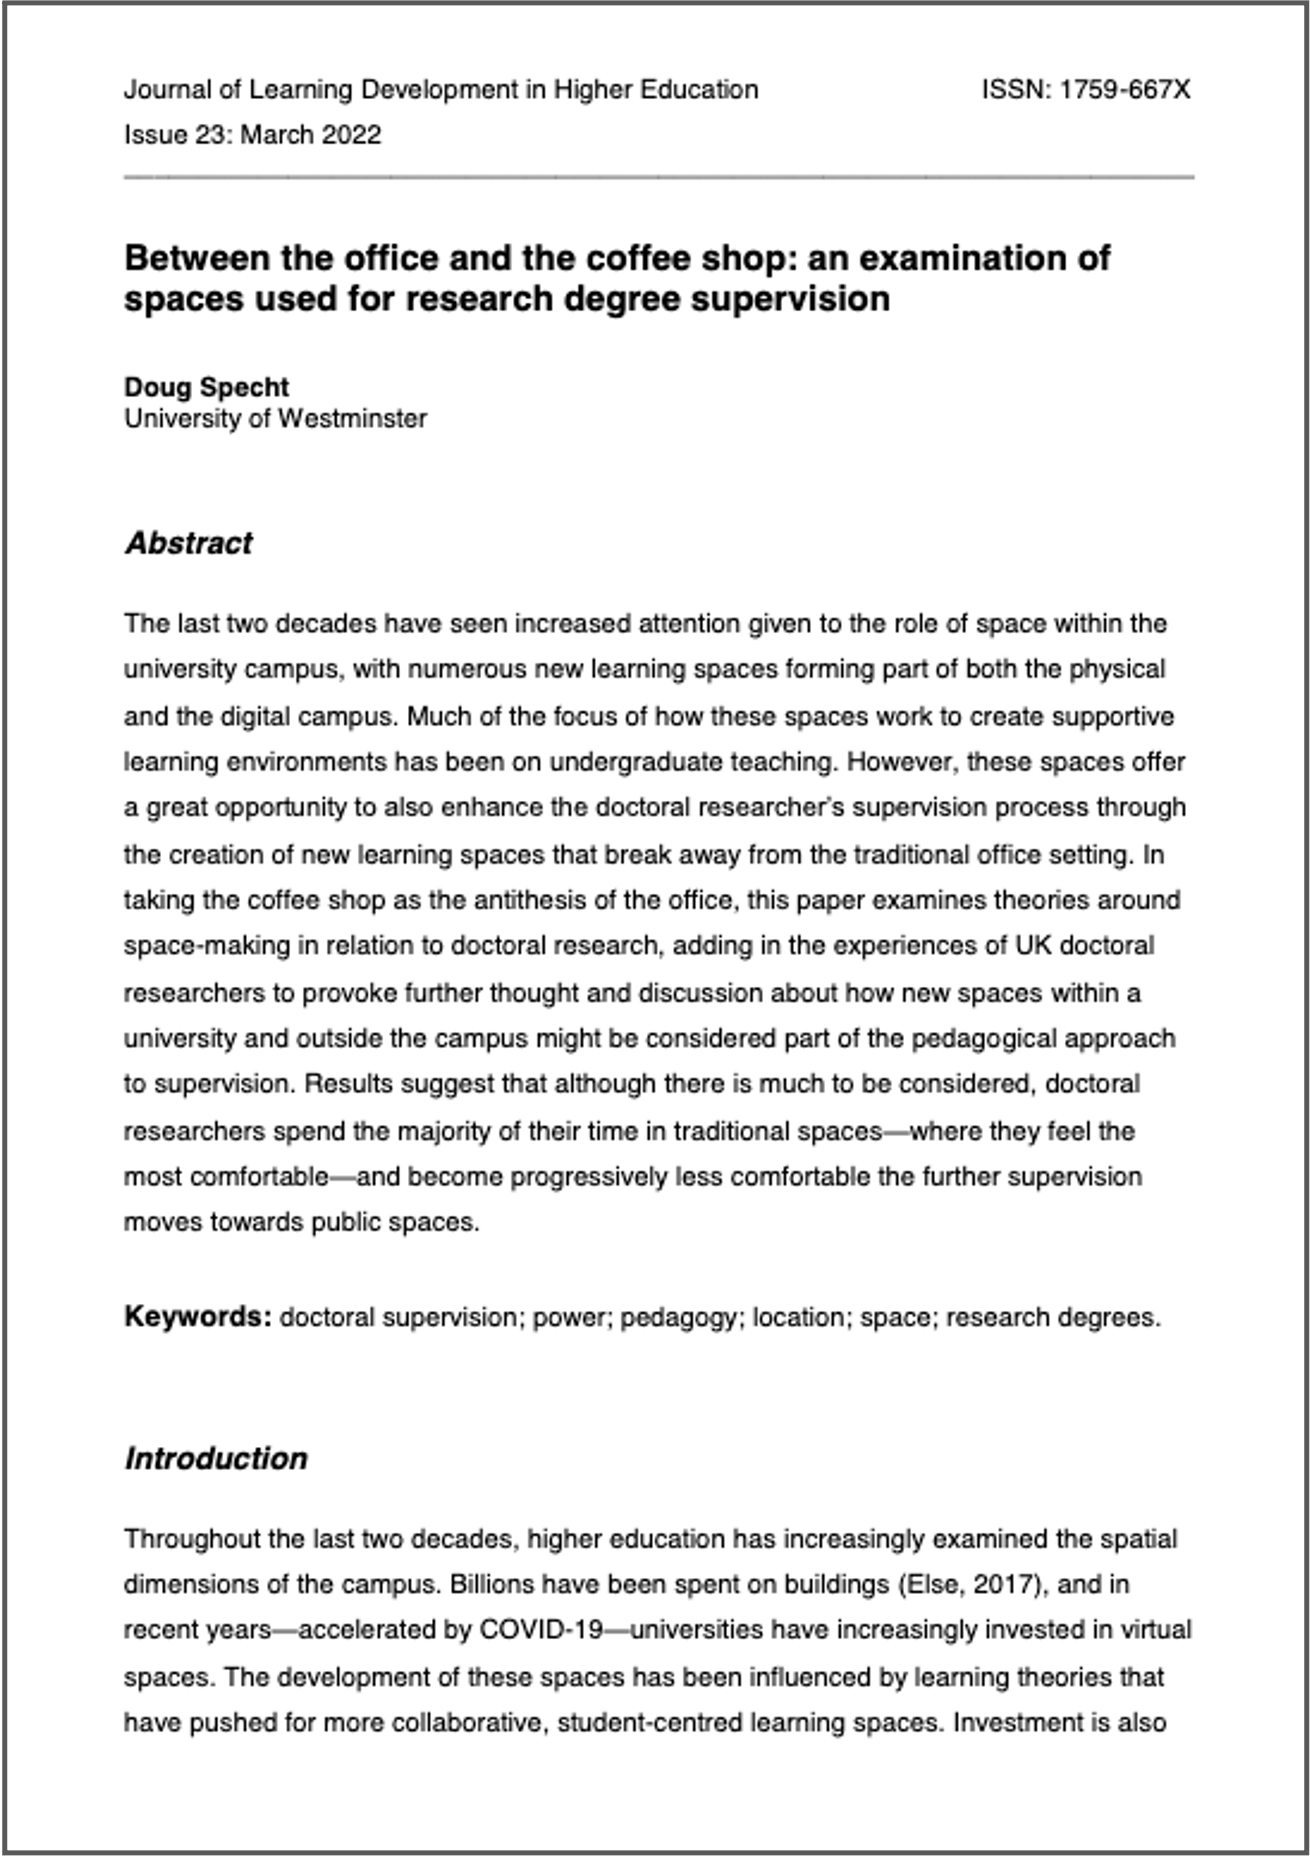 Between the Office and the Coffee Shop: A examination of spaces used for research degree supervision